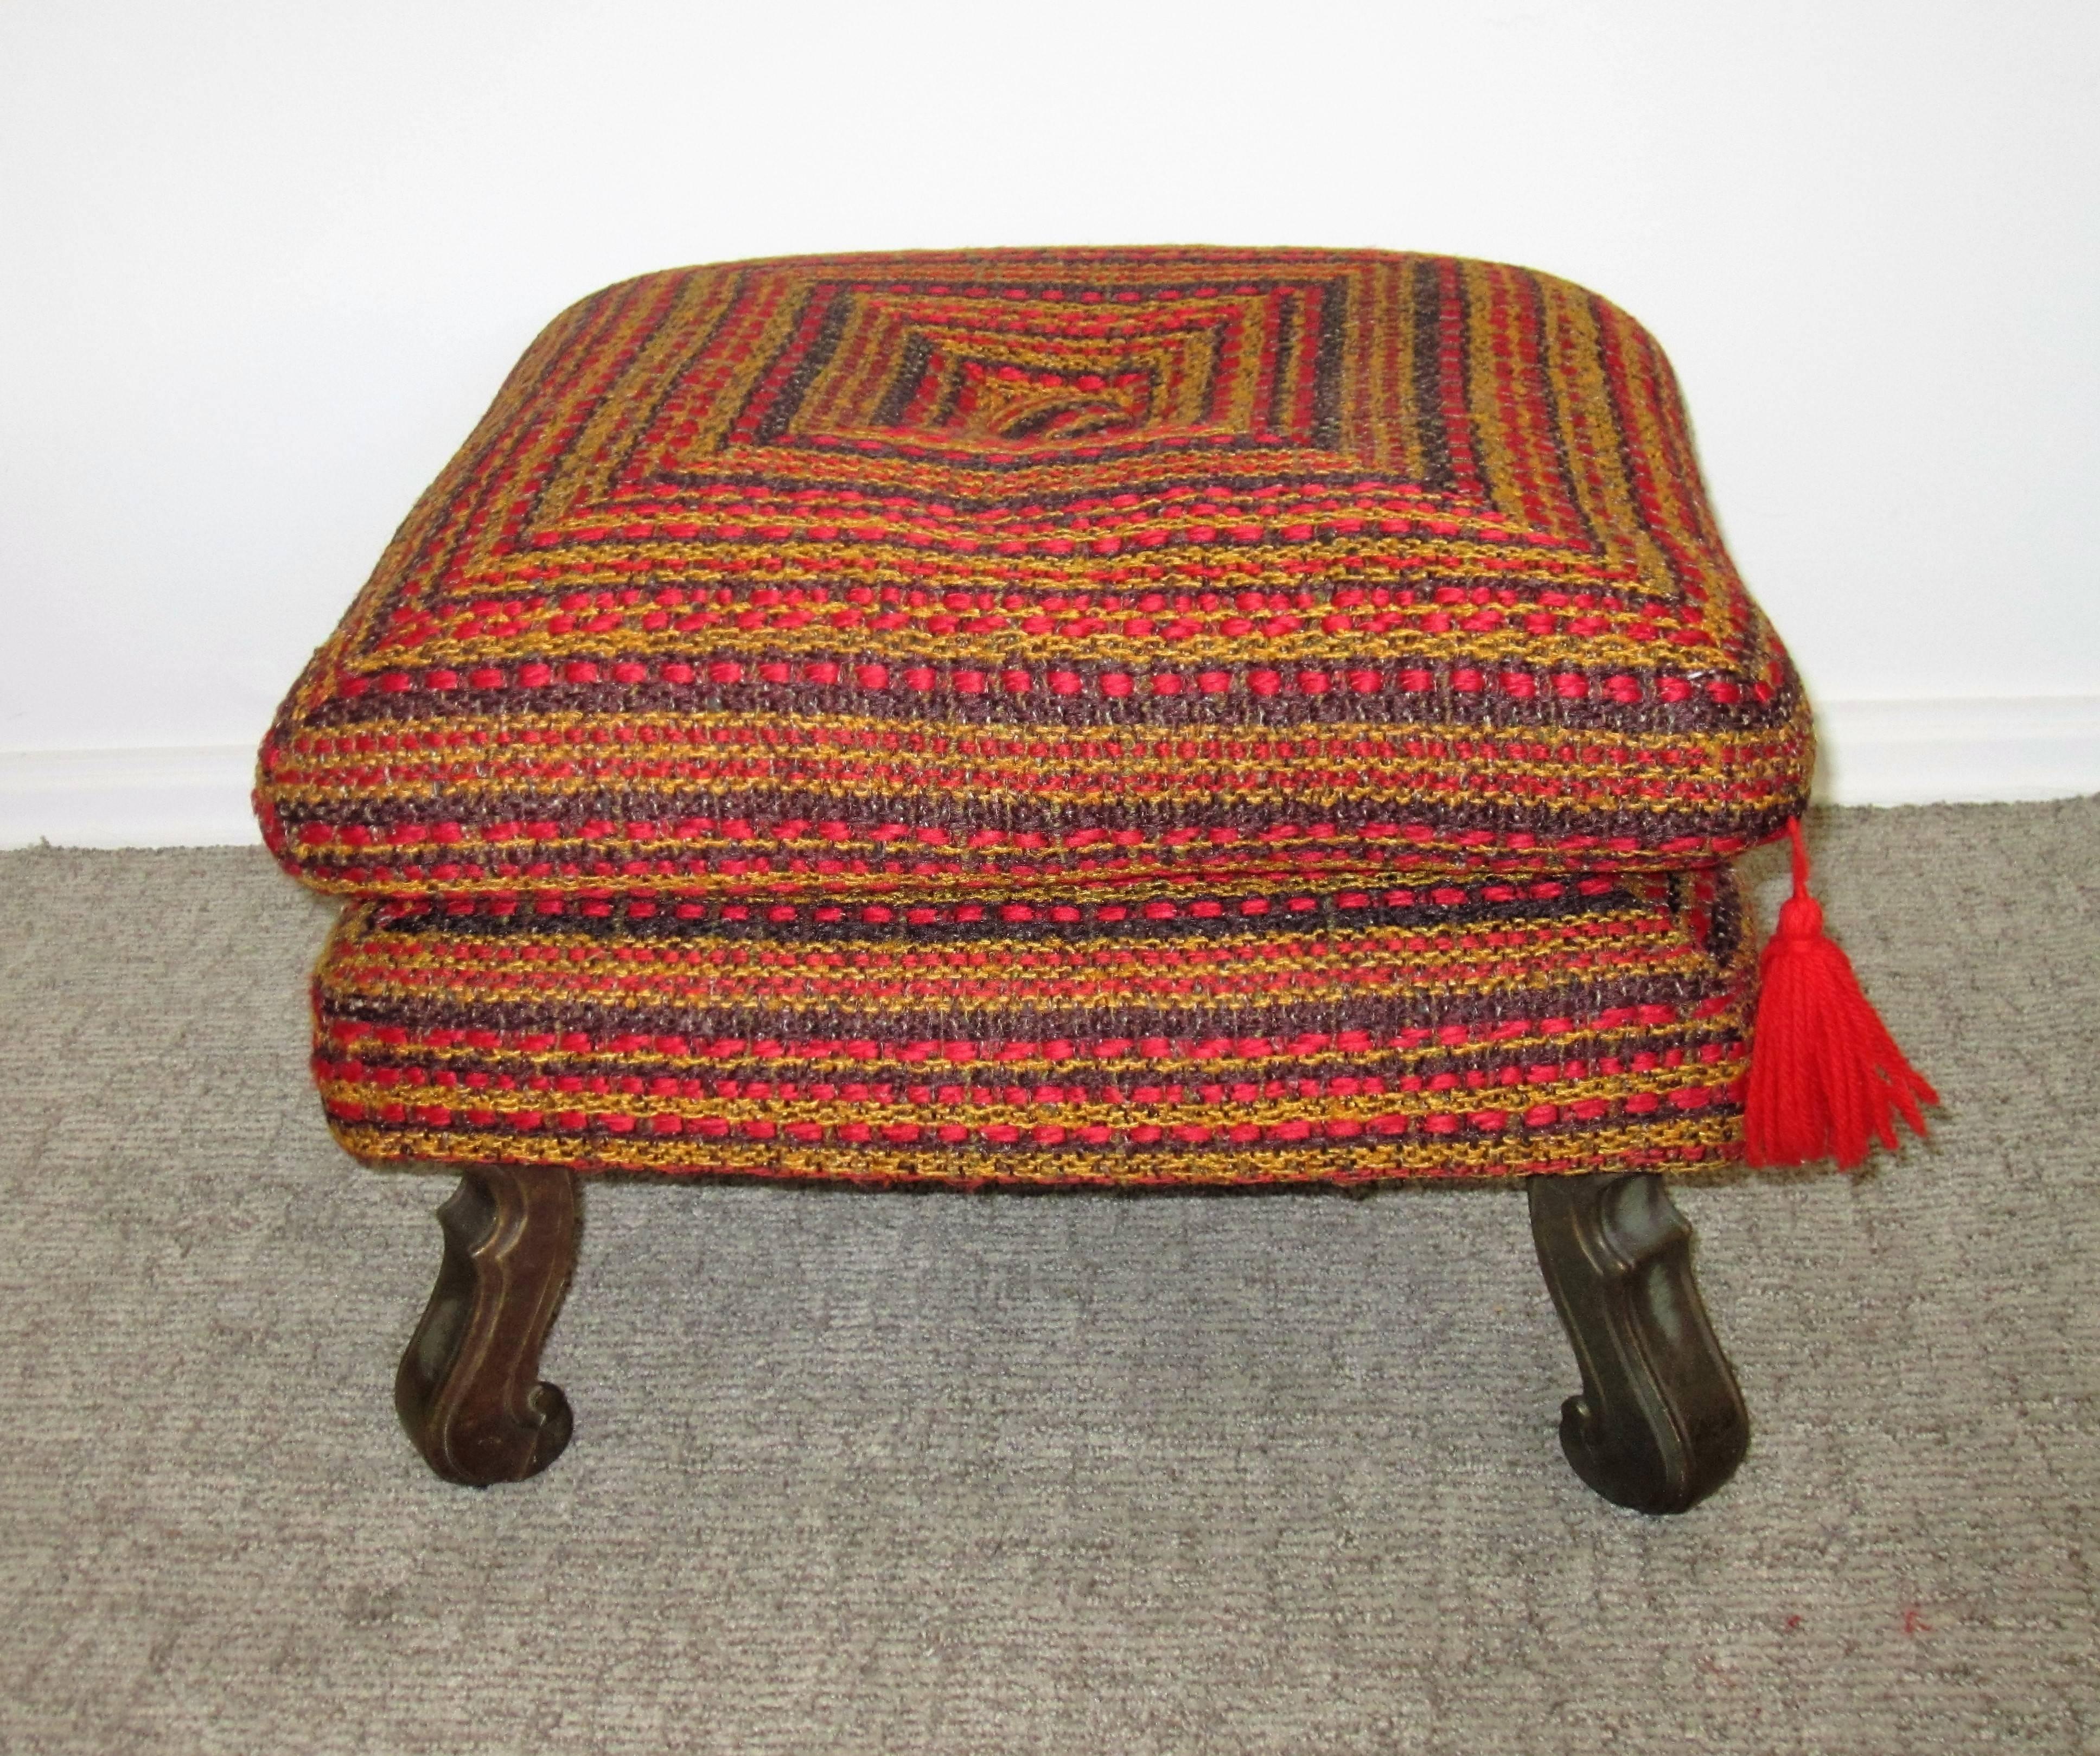 A vintage Midcentury colorful ottoman, bench, or stool. Pillow top is removable and base is firm - firm enough to hold a cocktail (as show in images.) Hue's include: red, orange, yellow, and blue, with decorative metal legs. 


